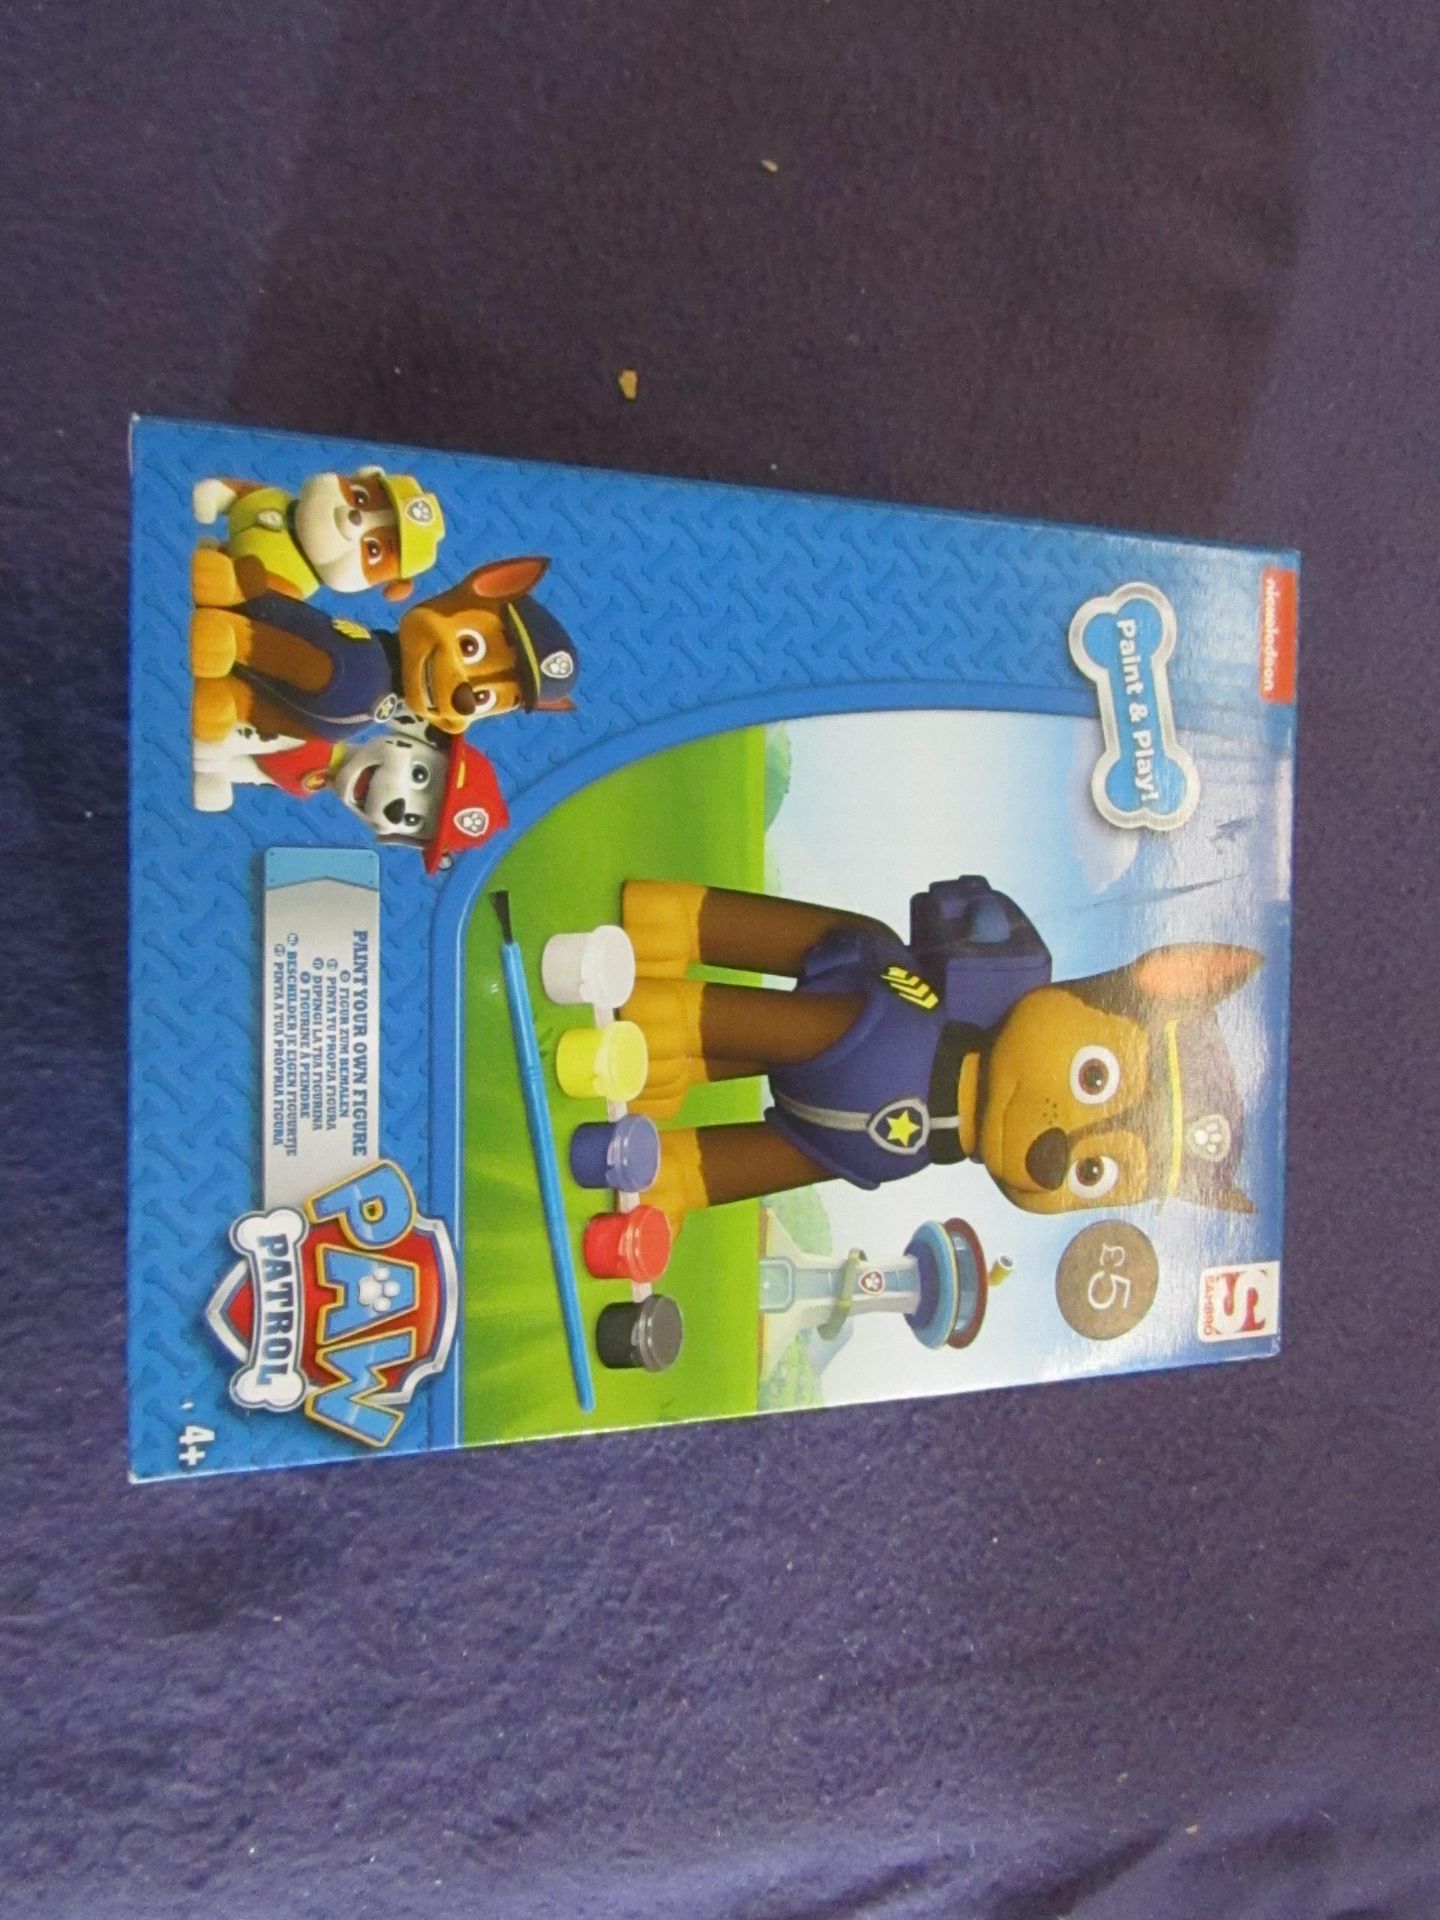 Nickelodeon - Paw Patrol Paint Your Own Figure ( Chase ) - Unused & Boxed.